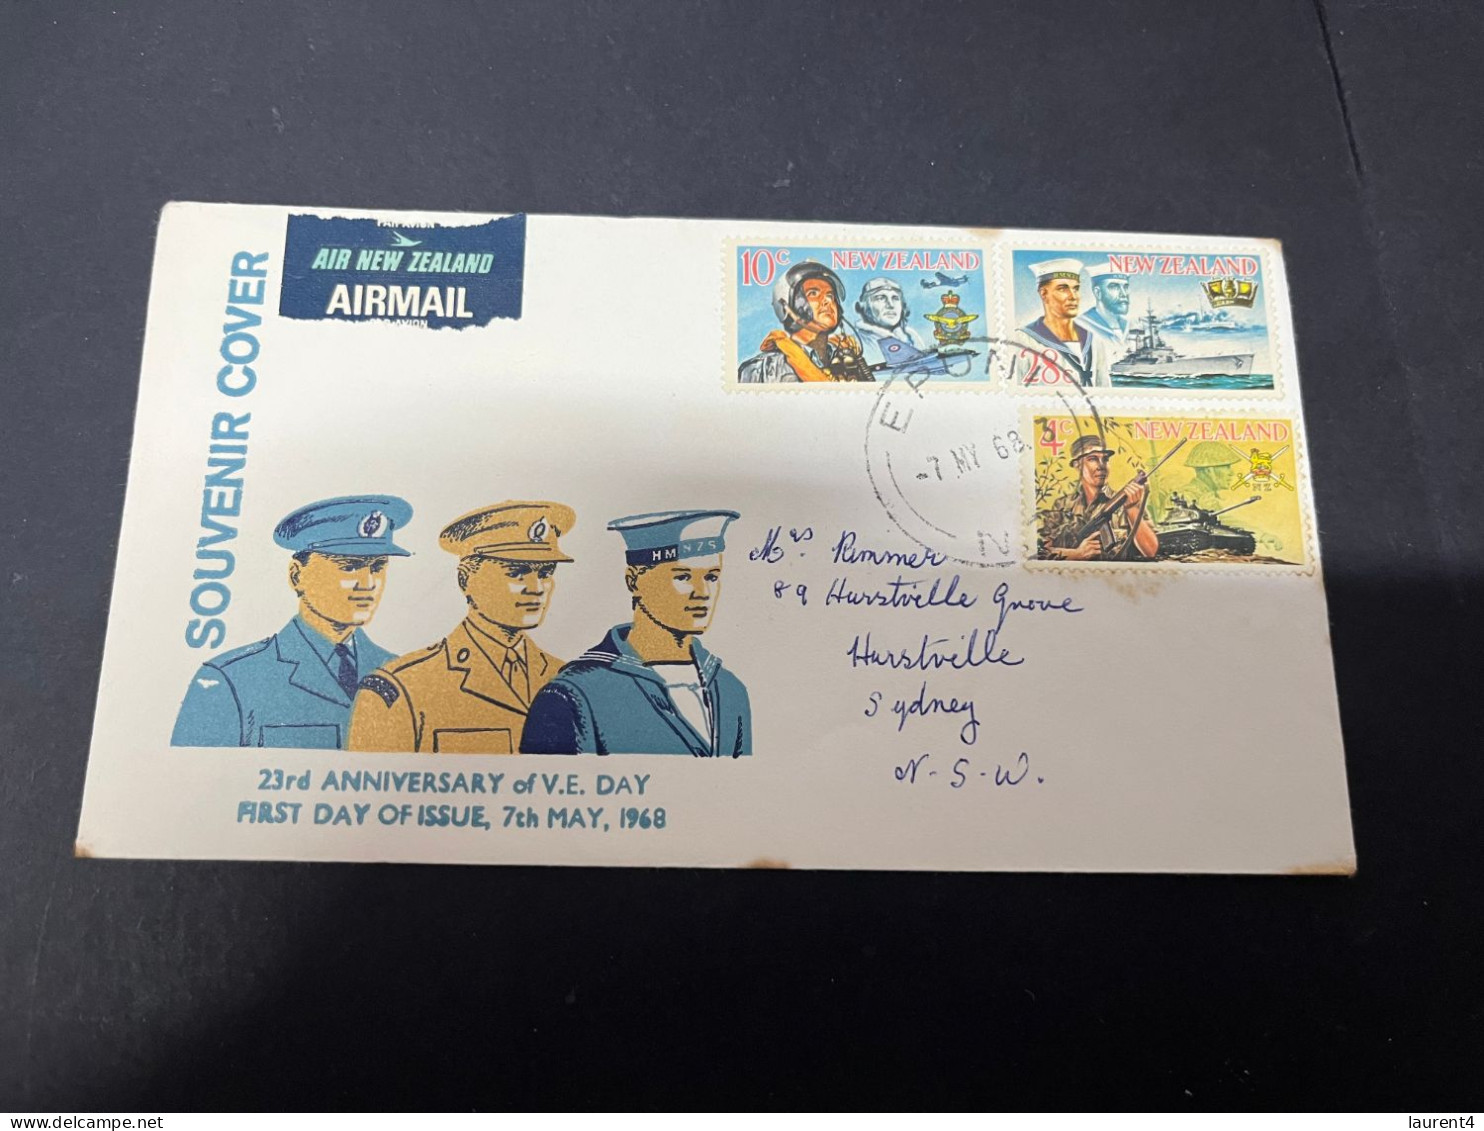 27-4-2024 (3 Z 14) FDC - New Zealand - Posted To Australia 1968 - V.E Day 25th Anniversary - FDC